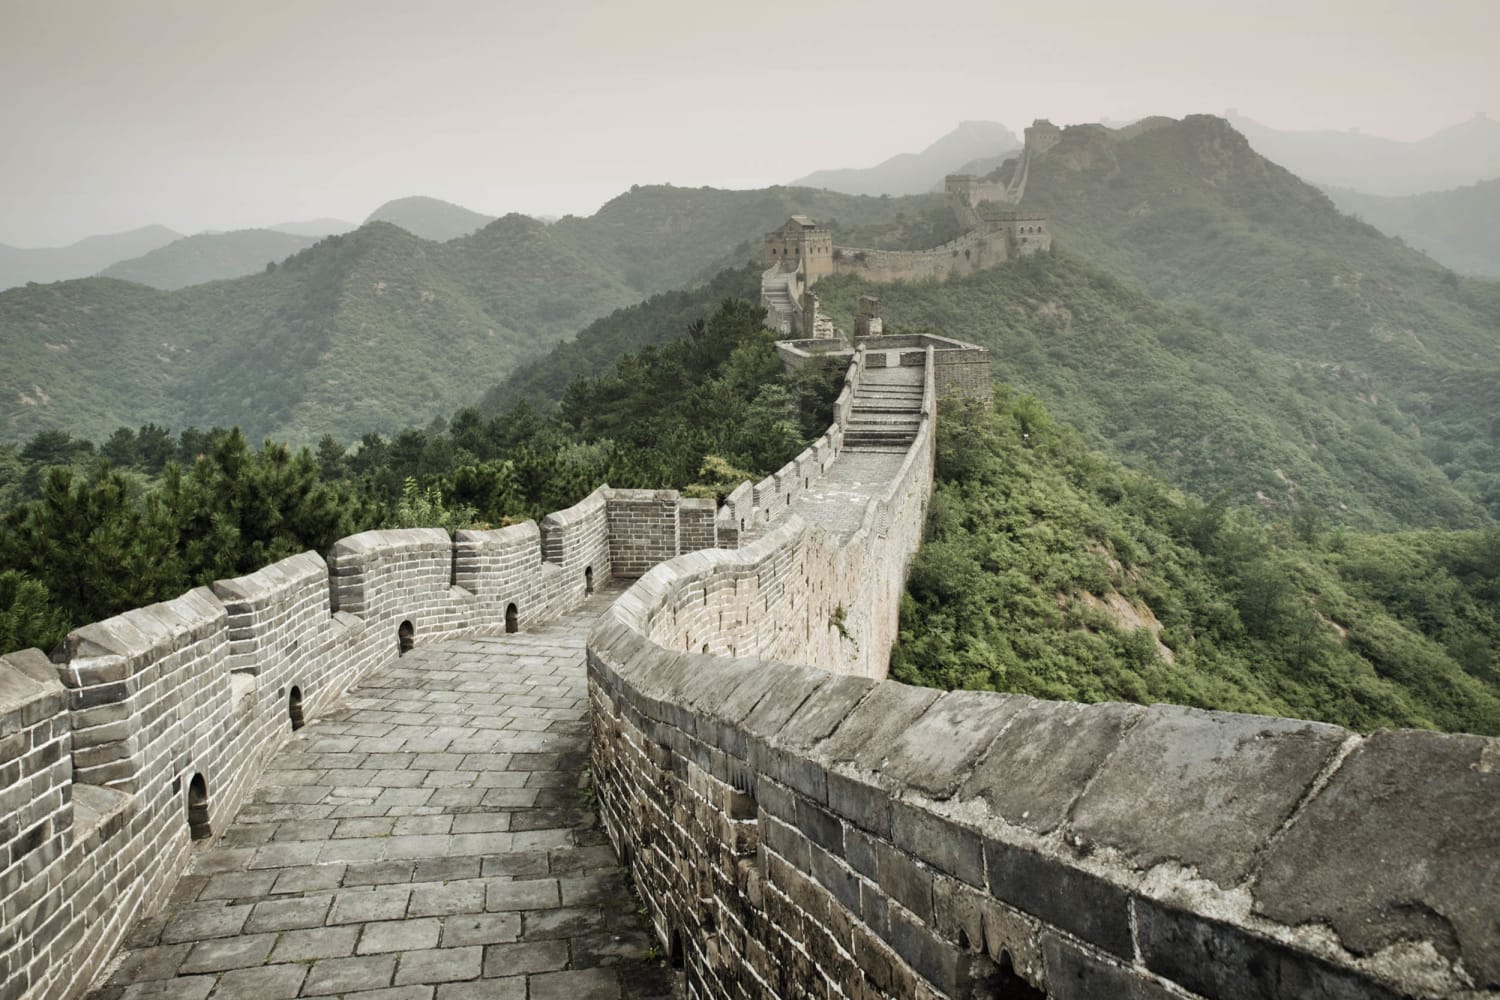 E-waste this year may outweigh the Great Wall of China